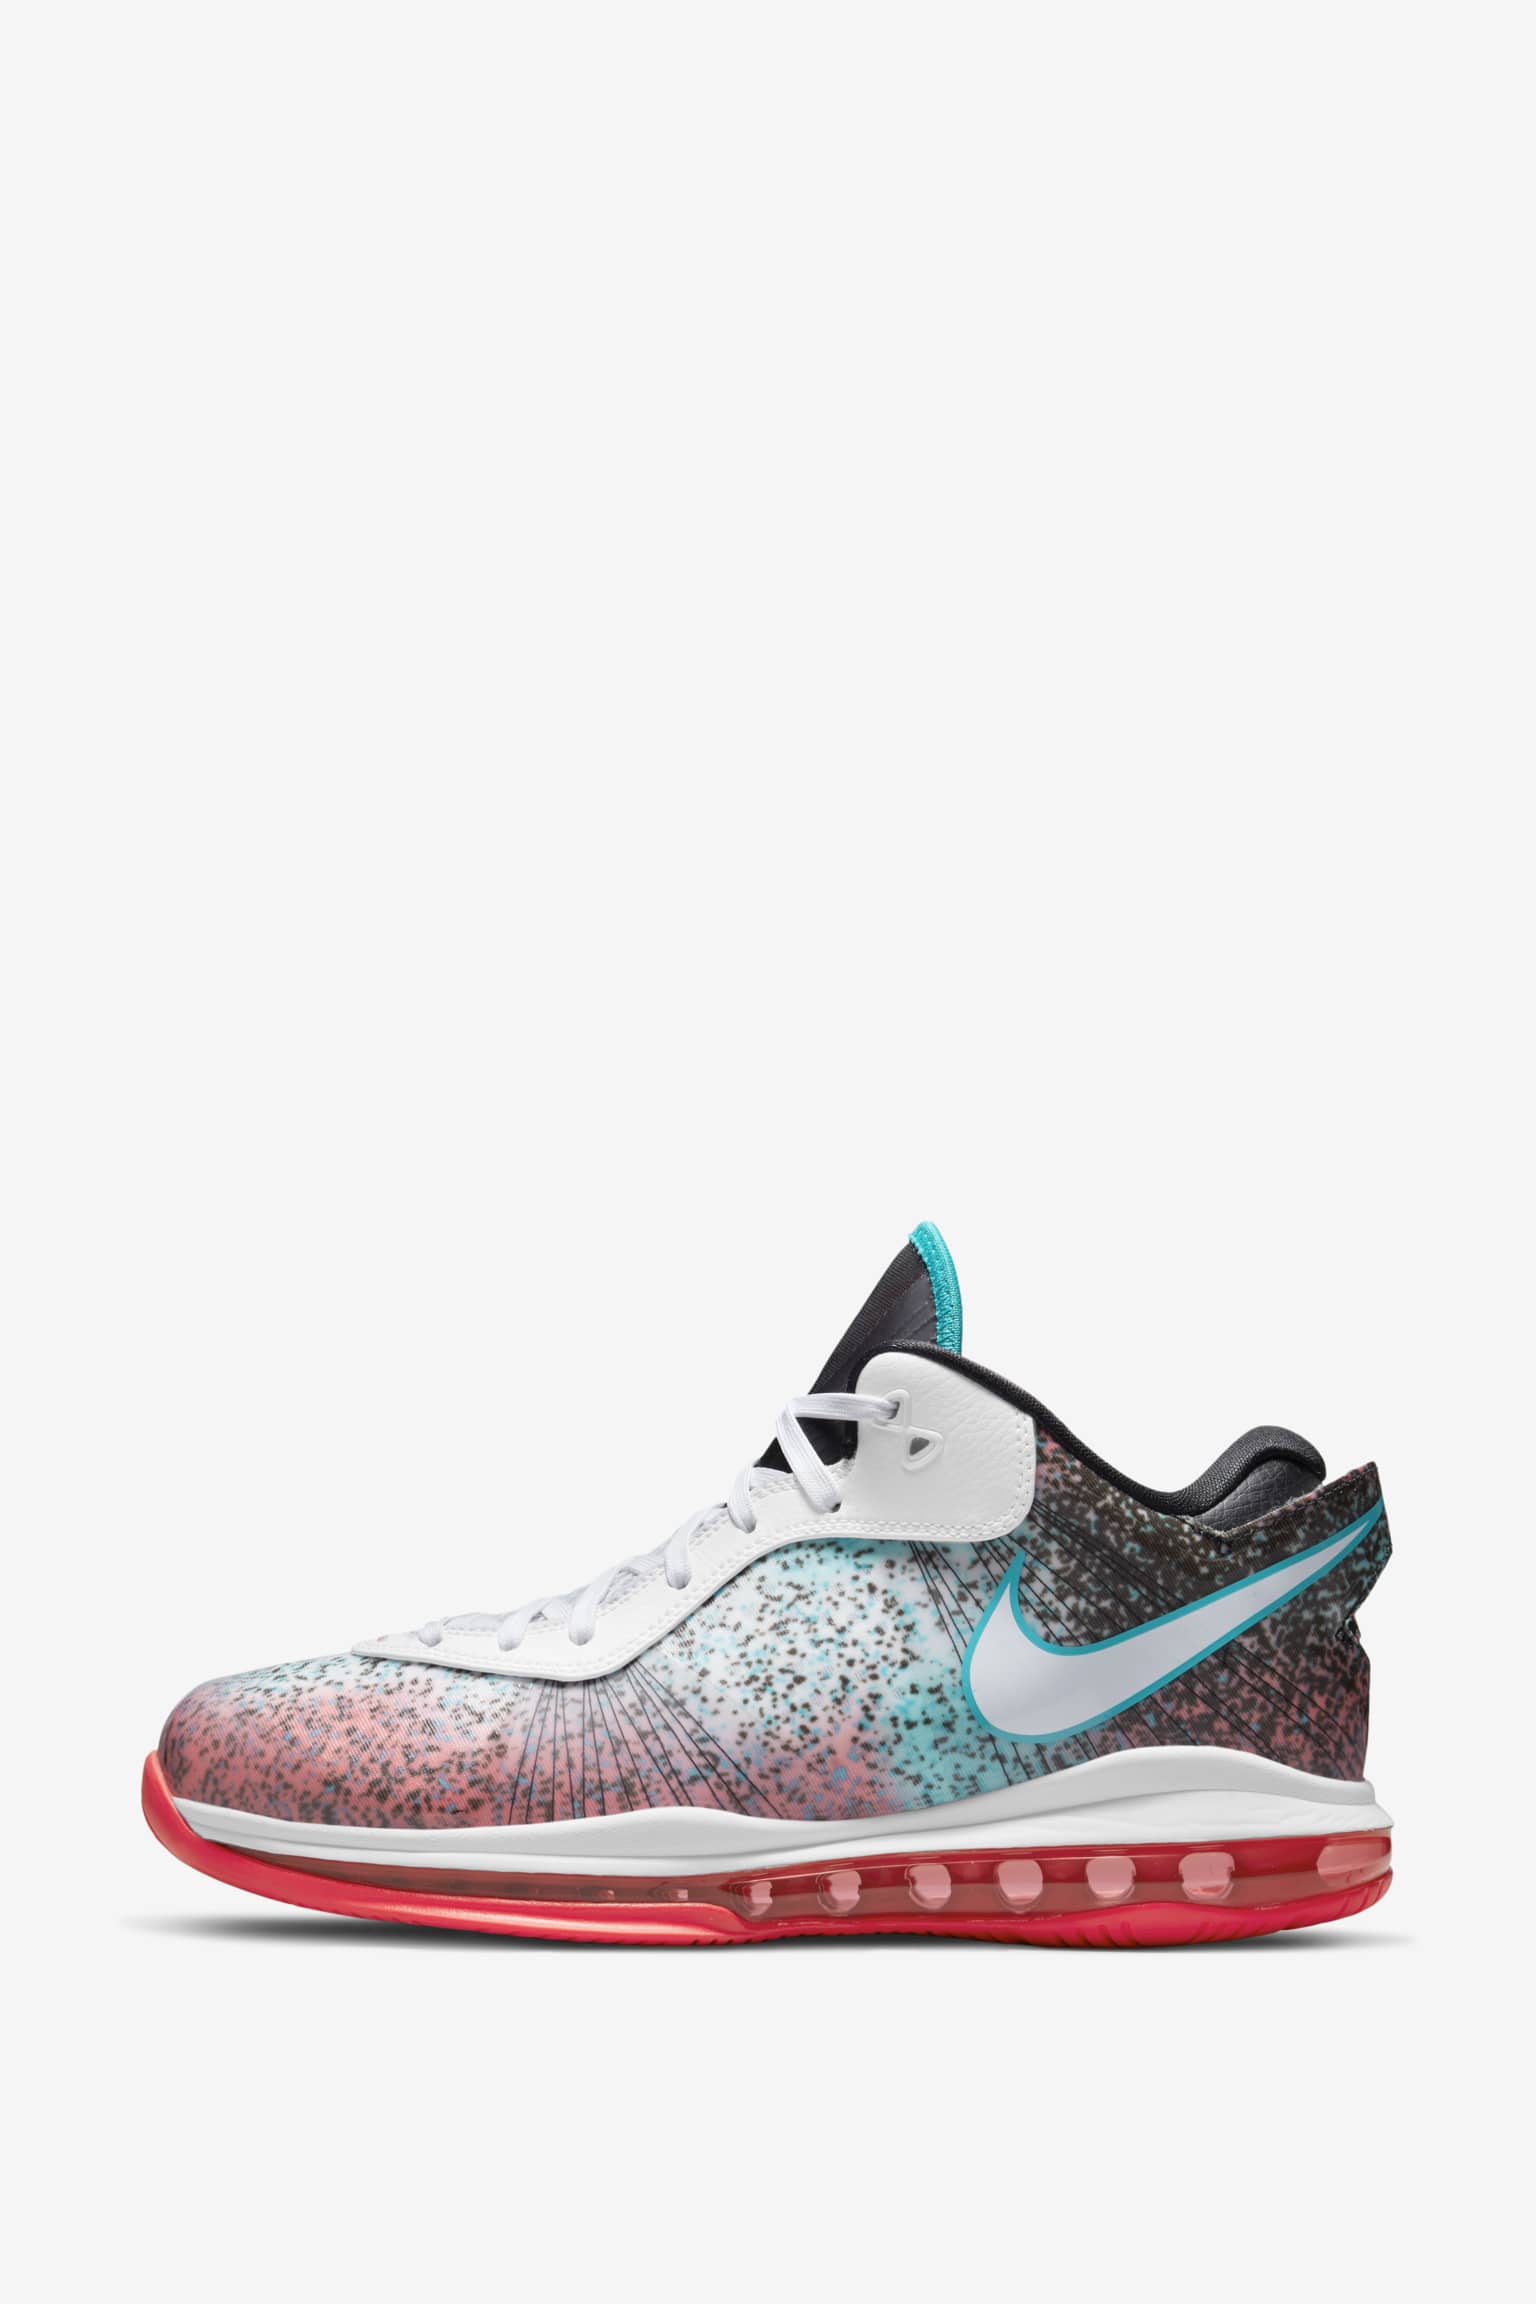 LeBron 8 V/2 Low 'Miami Nights' Release Date. Nike SNKRS PH